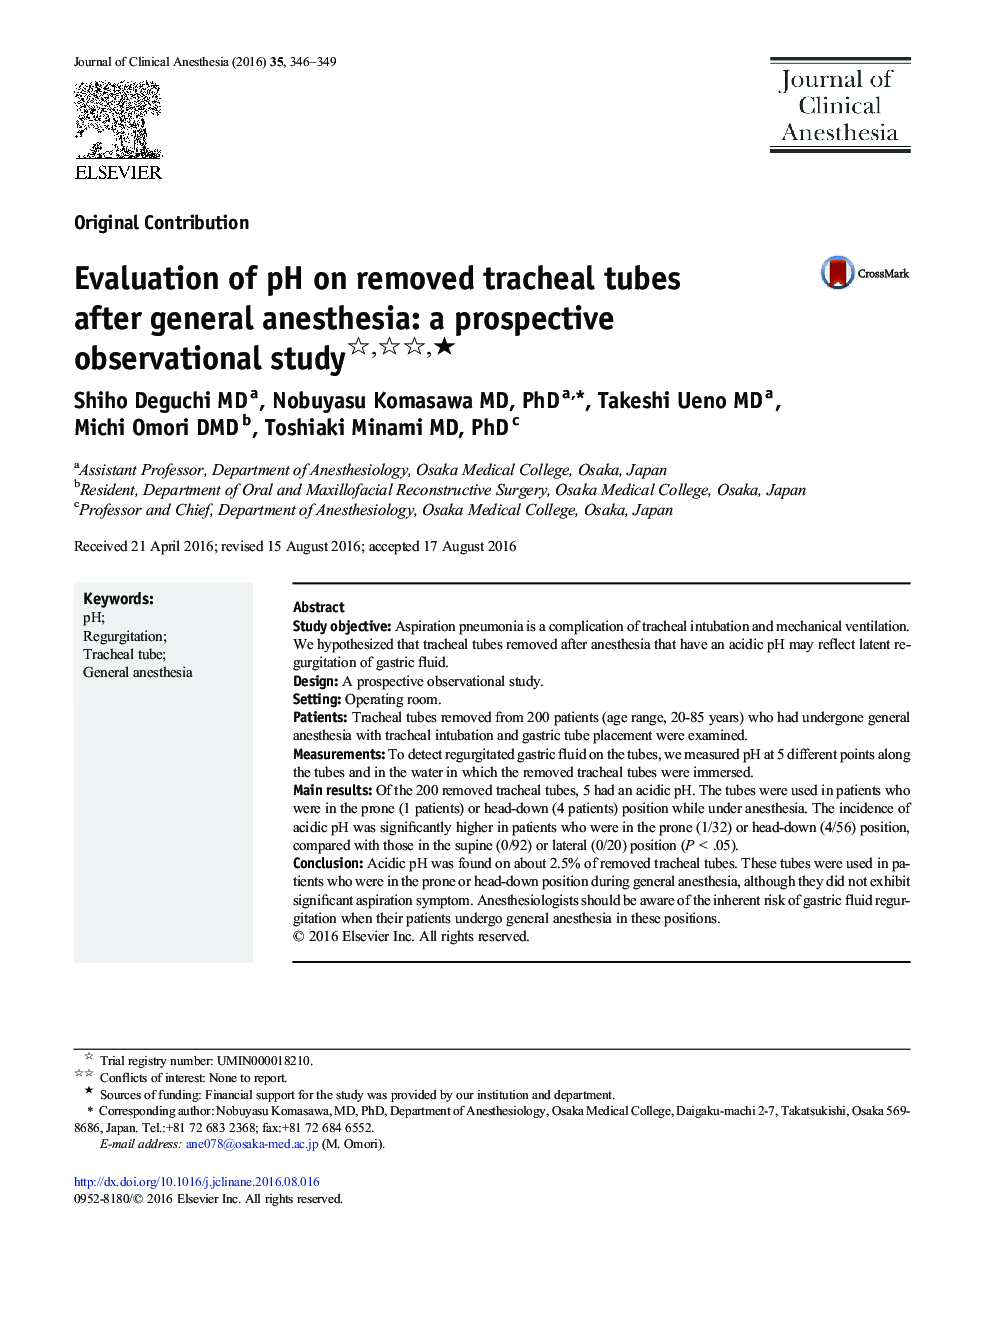 Original ContributionEvaluation of pH on removed tracheal tubes after general anesthesia: a prospective observational studyâ